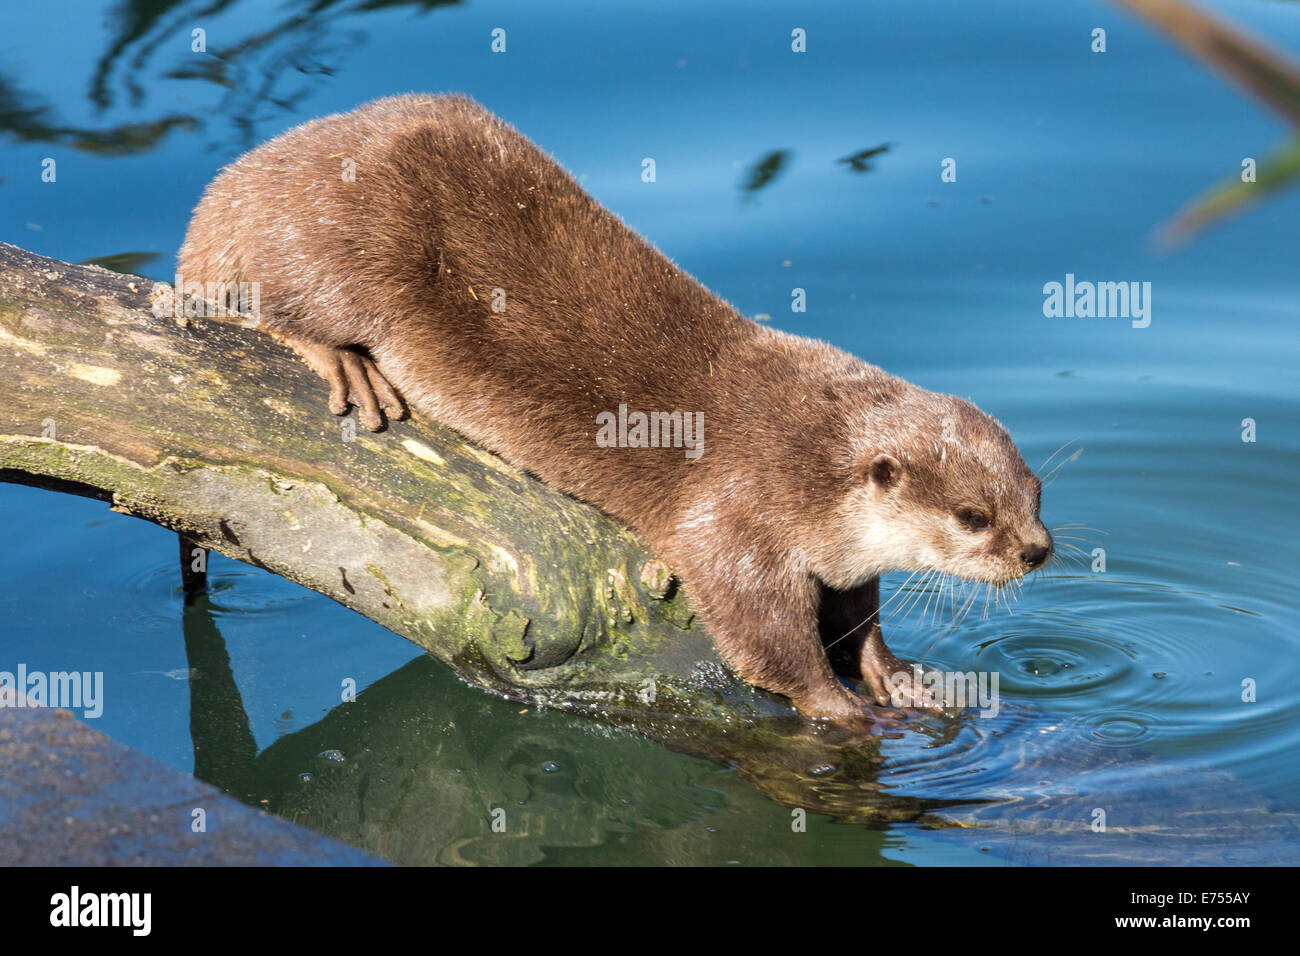 Asian small-clawed otter standing on a log Stock Photo